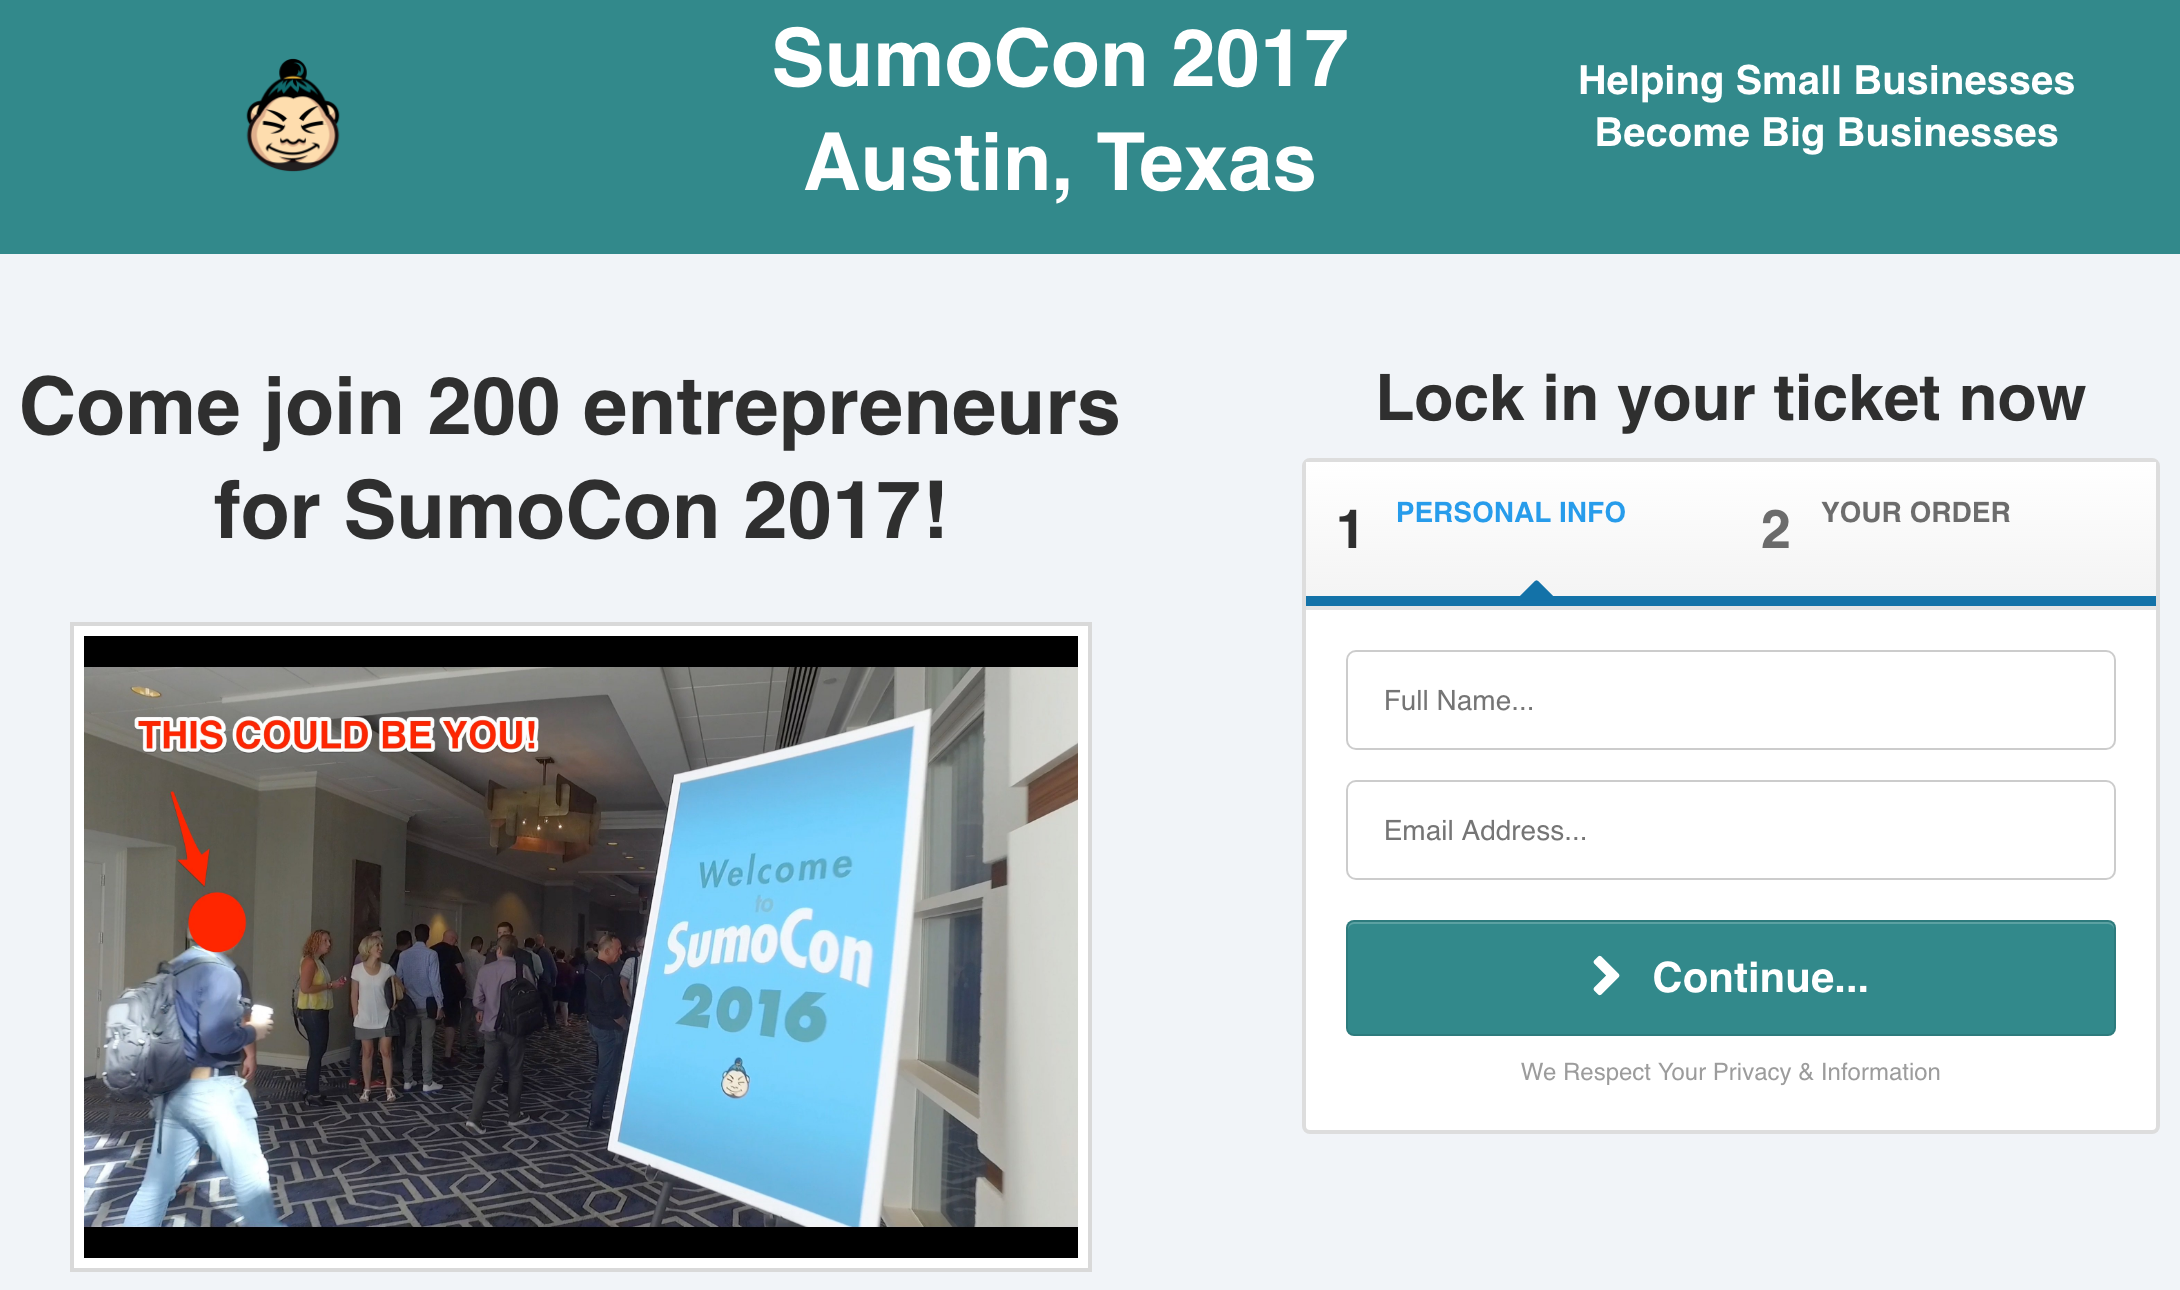 Screenshot showing a landing page for SumoCon 2017